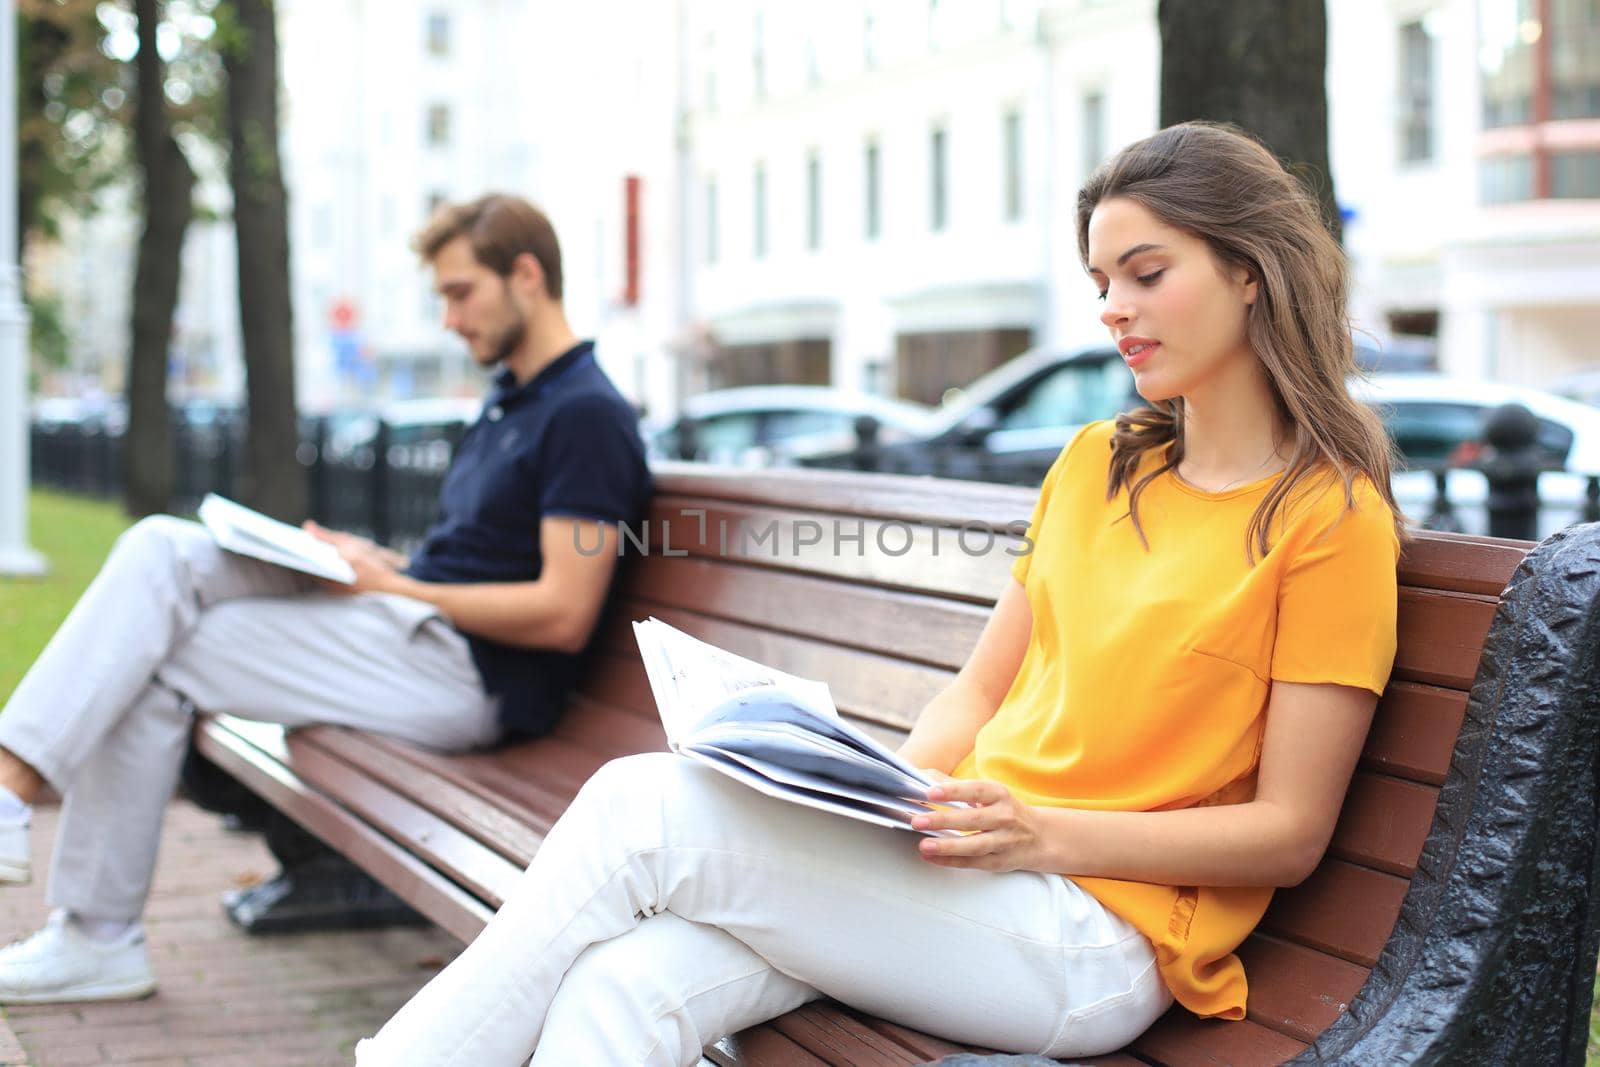 Romantic young couple in summer clothes smiling and reading books together while sitting on bench in city street